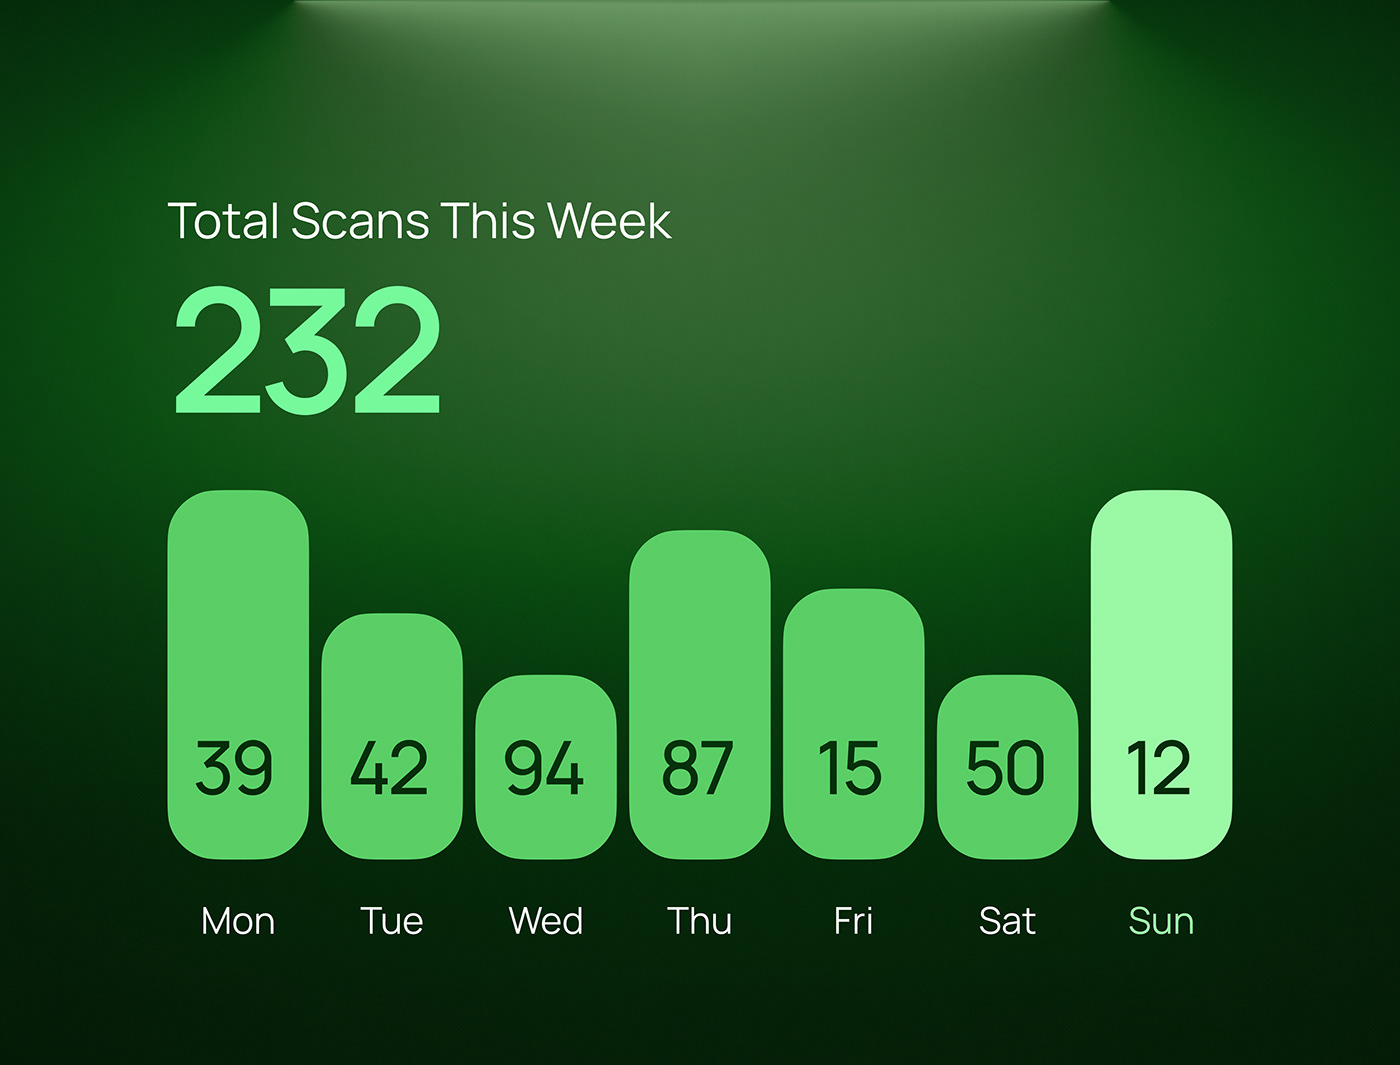 widget from the app on larger scale